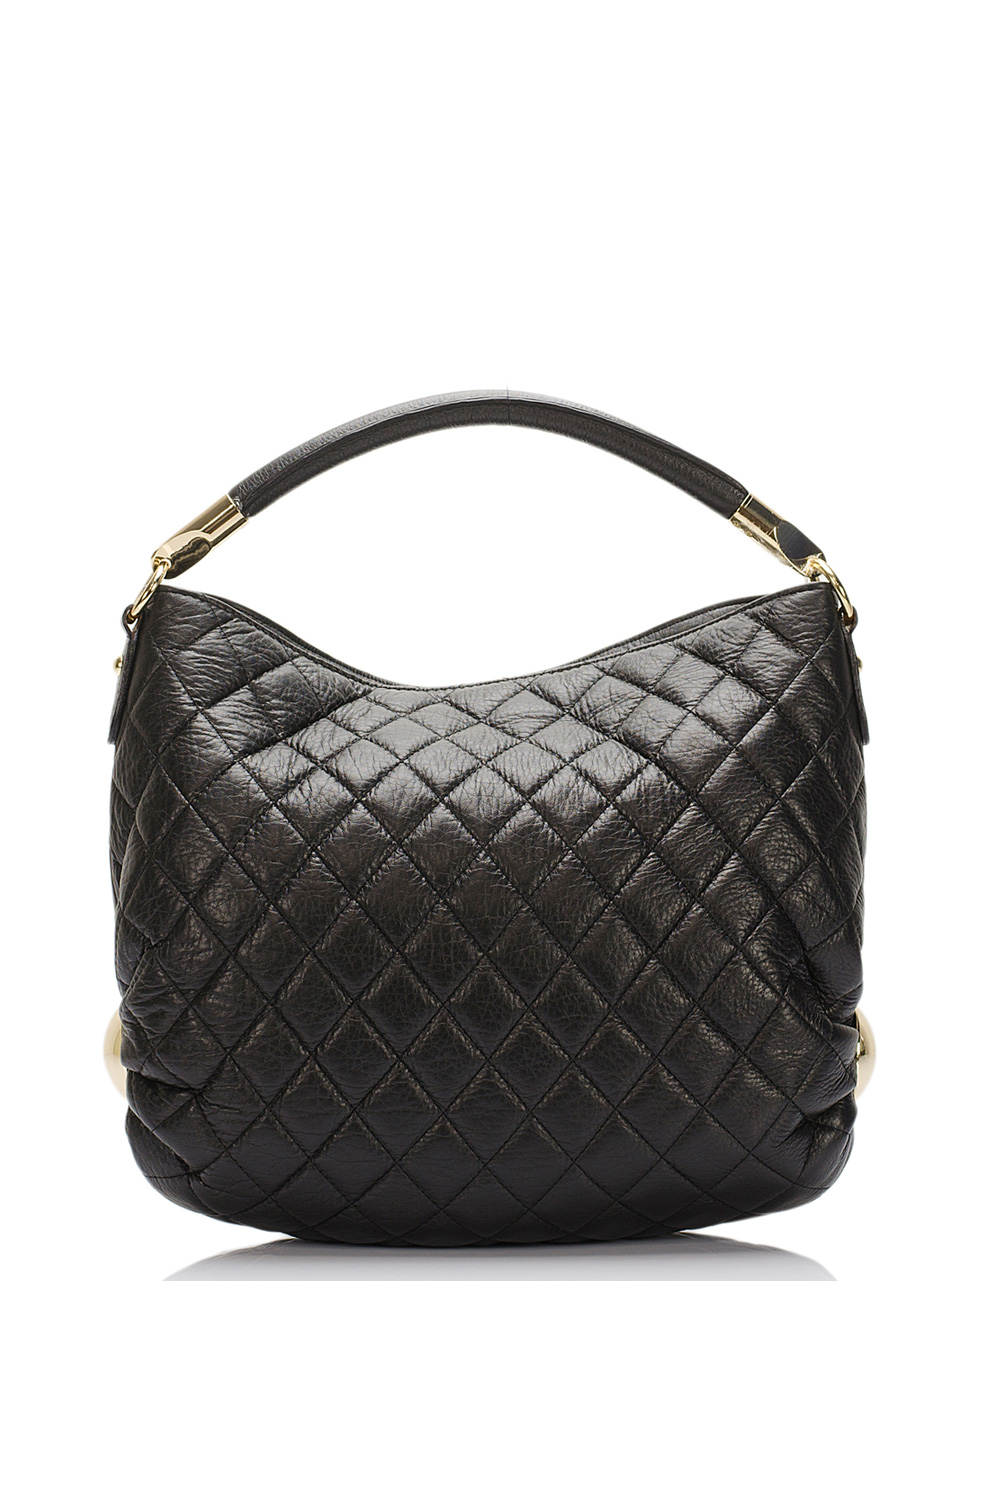 Geanta Piele Quilted Neagra